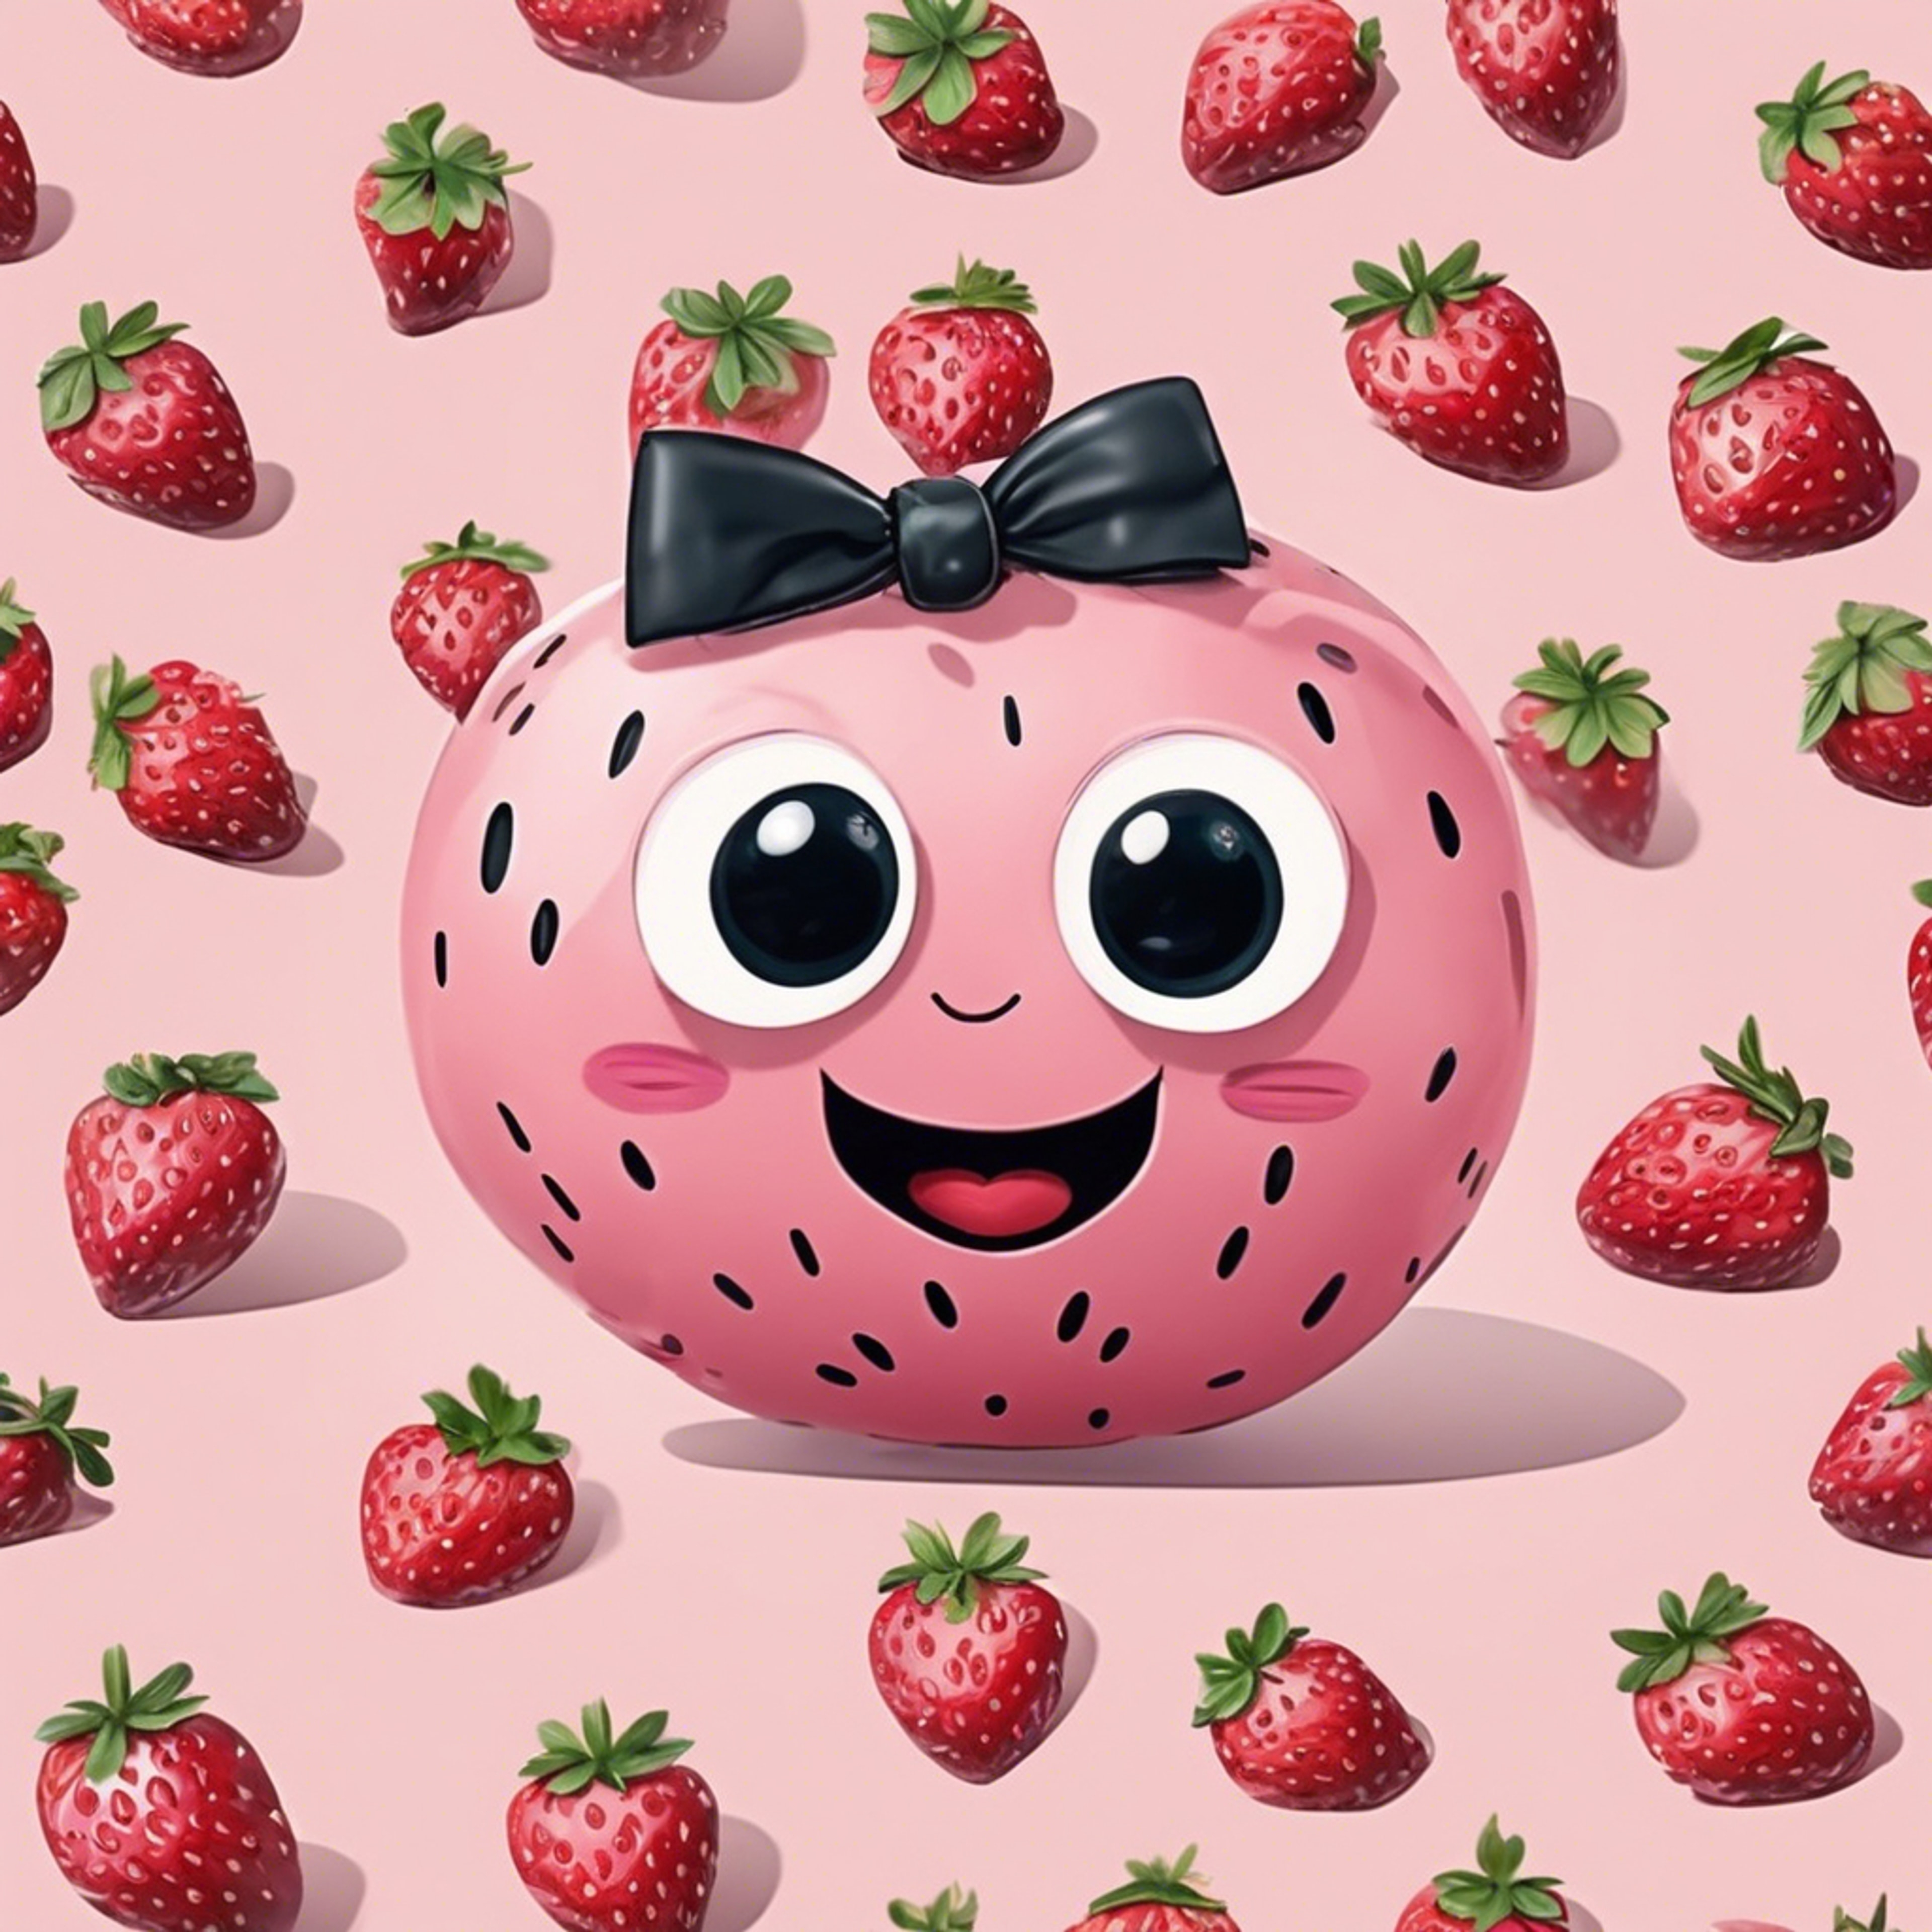 Cute, smiling light pink kawaii strawberries with big eyes and little bow ties. Tapet[24a5e2efca874b08b7f4]